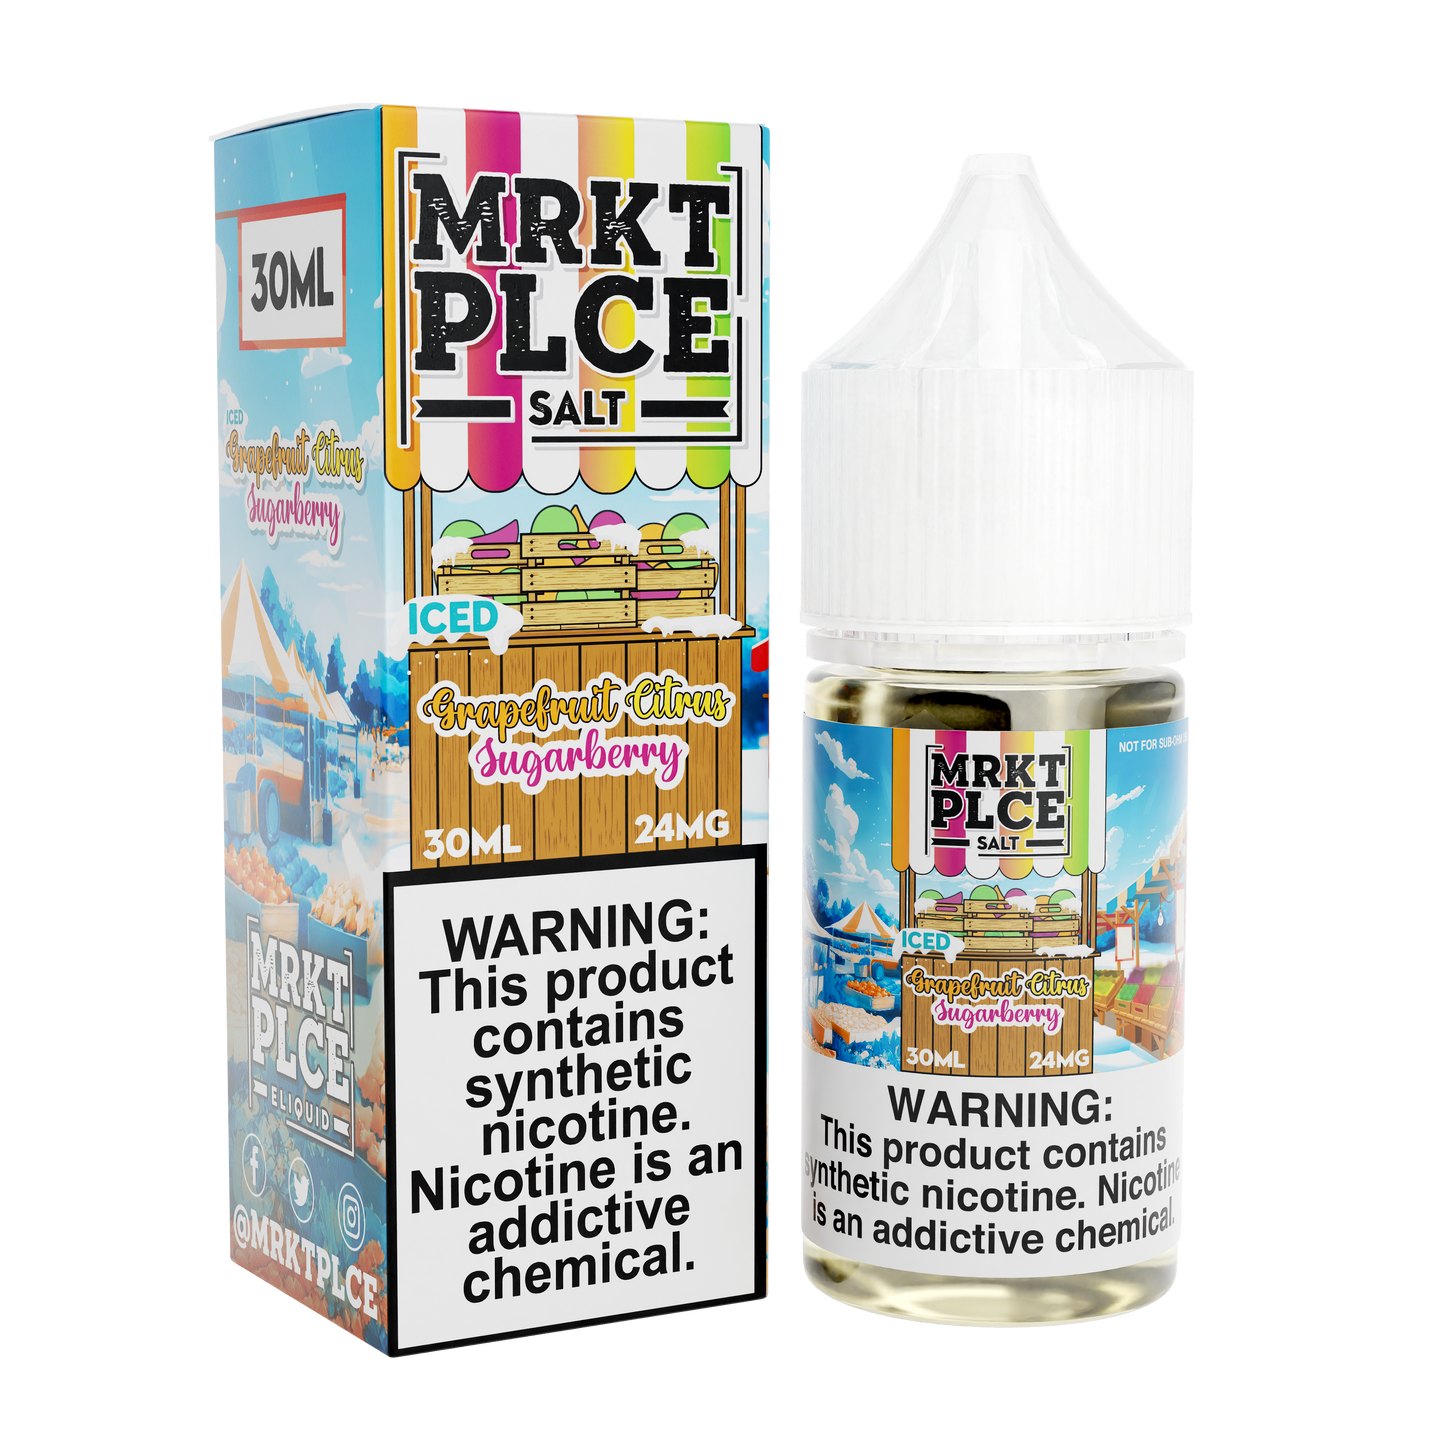 Iced Grapefruit Citrus Sugarberry by MRKT PLCE Salts Series 30mL with Packaging